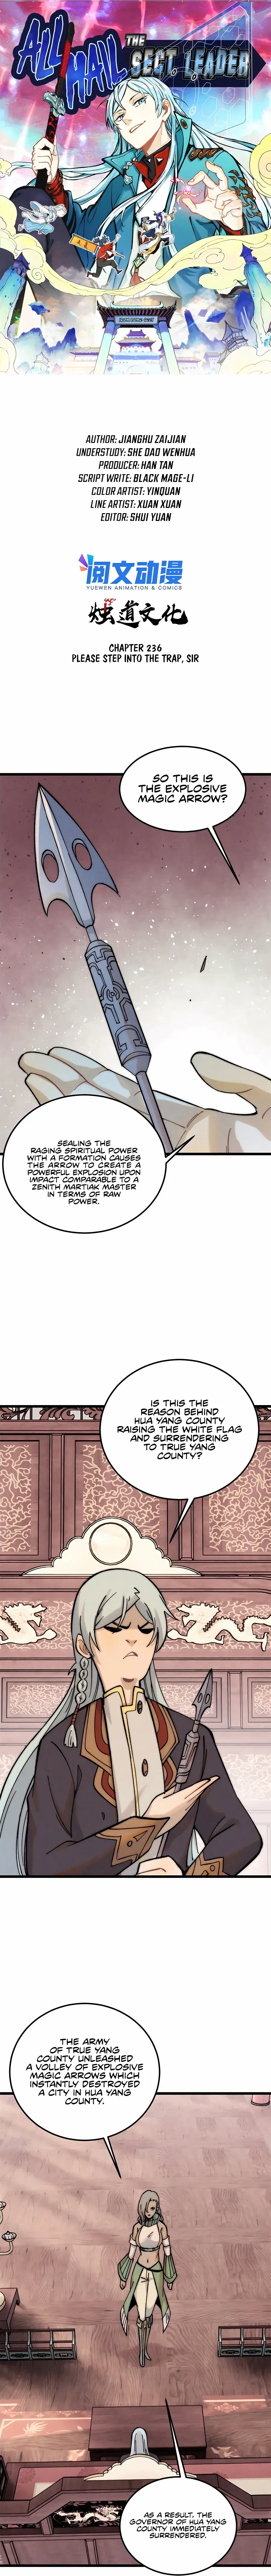 All Hail the Sect Leader Chapter 236 - Page 3